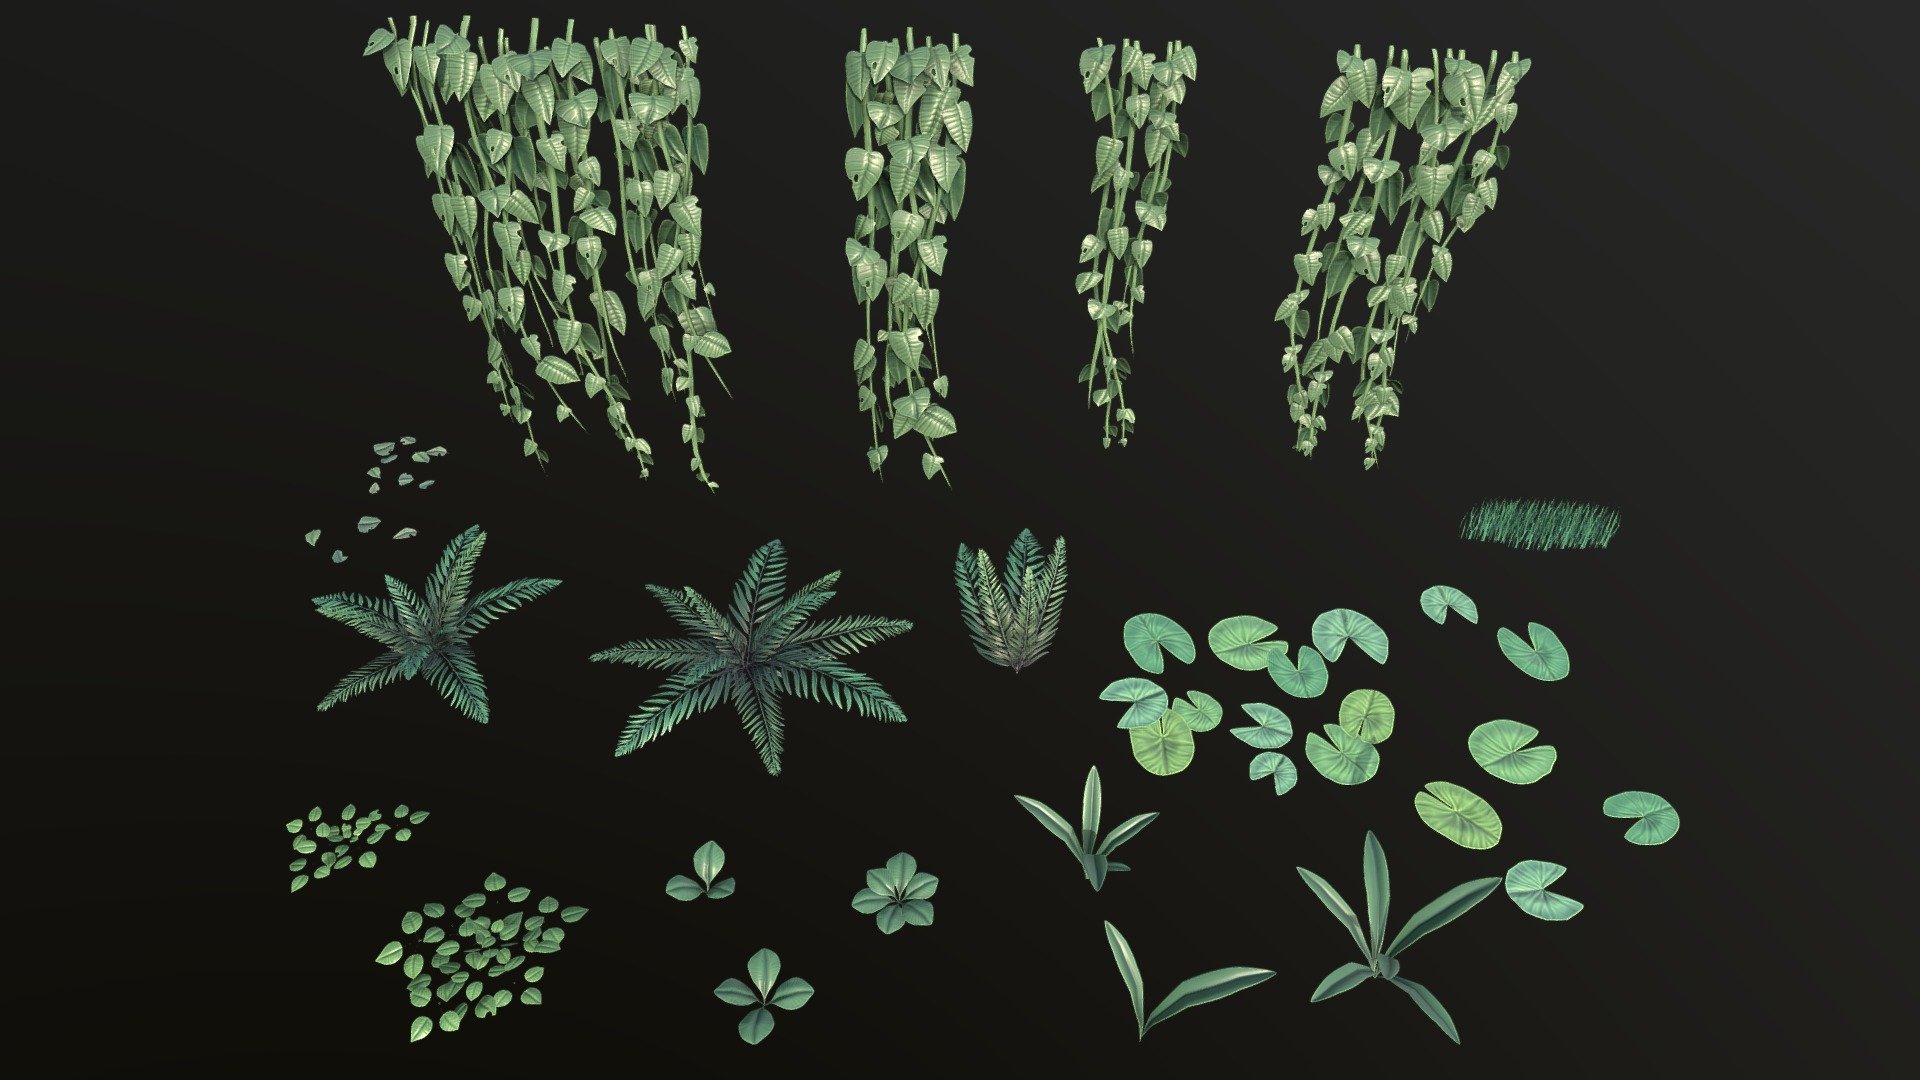 Foliage assets made for the game Cyrah's Ascent, game is available for free on Steam: https://store.steampowered.com/app/1992850/Cyrahs_Ascent/ - Cyrah's Ascent Foliage Assets - 3D model by ziodynes098 3d model